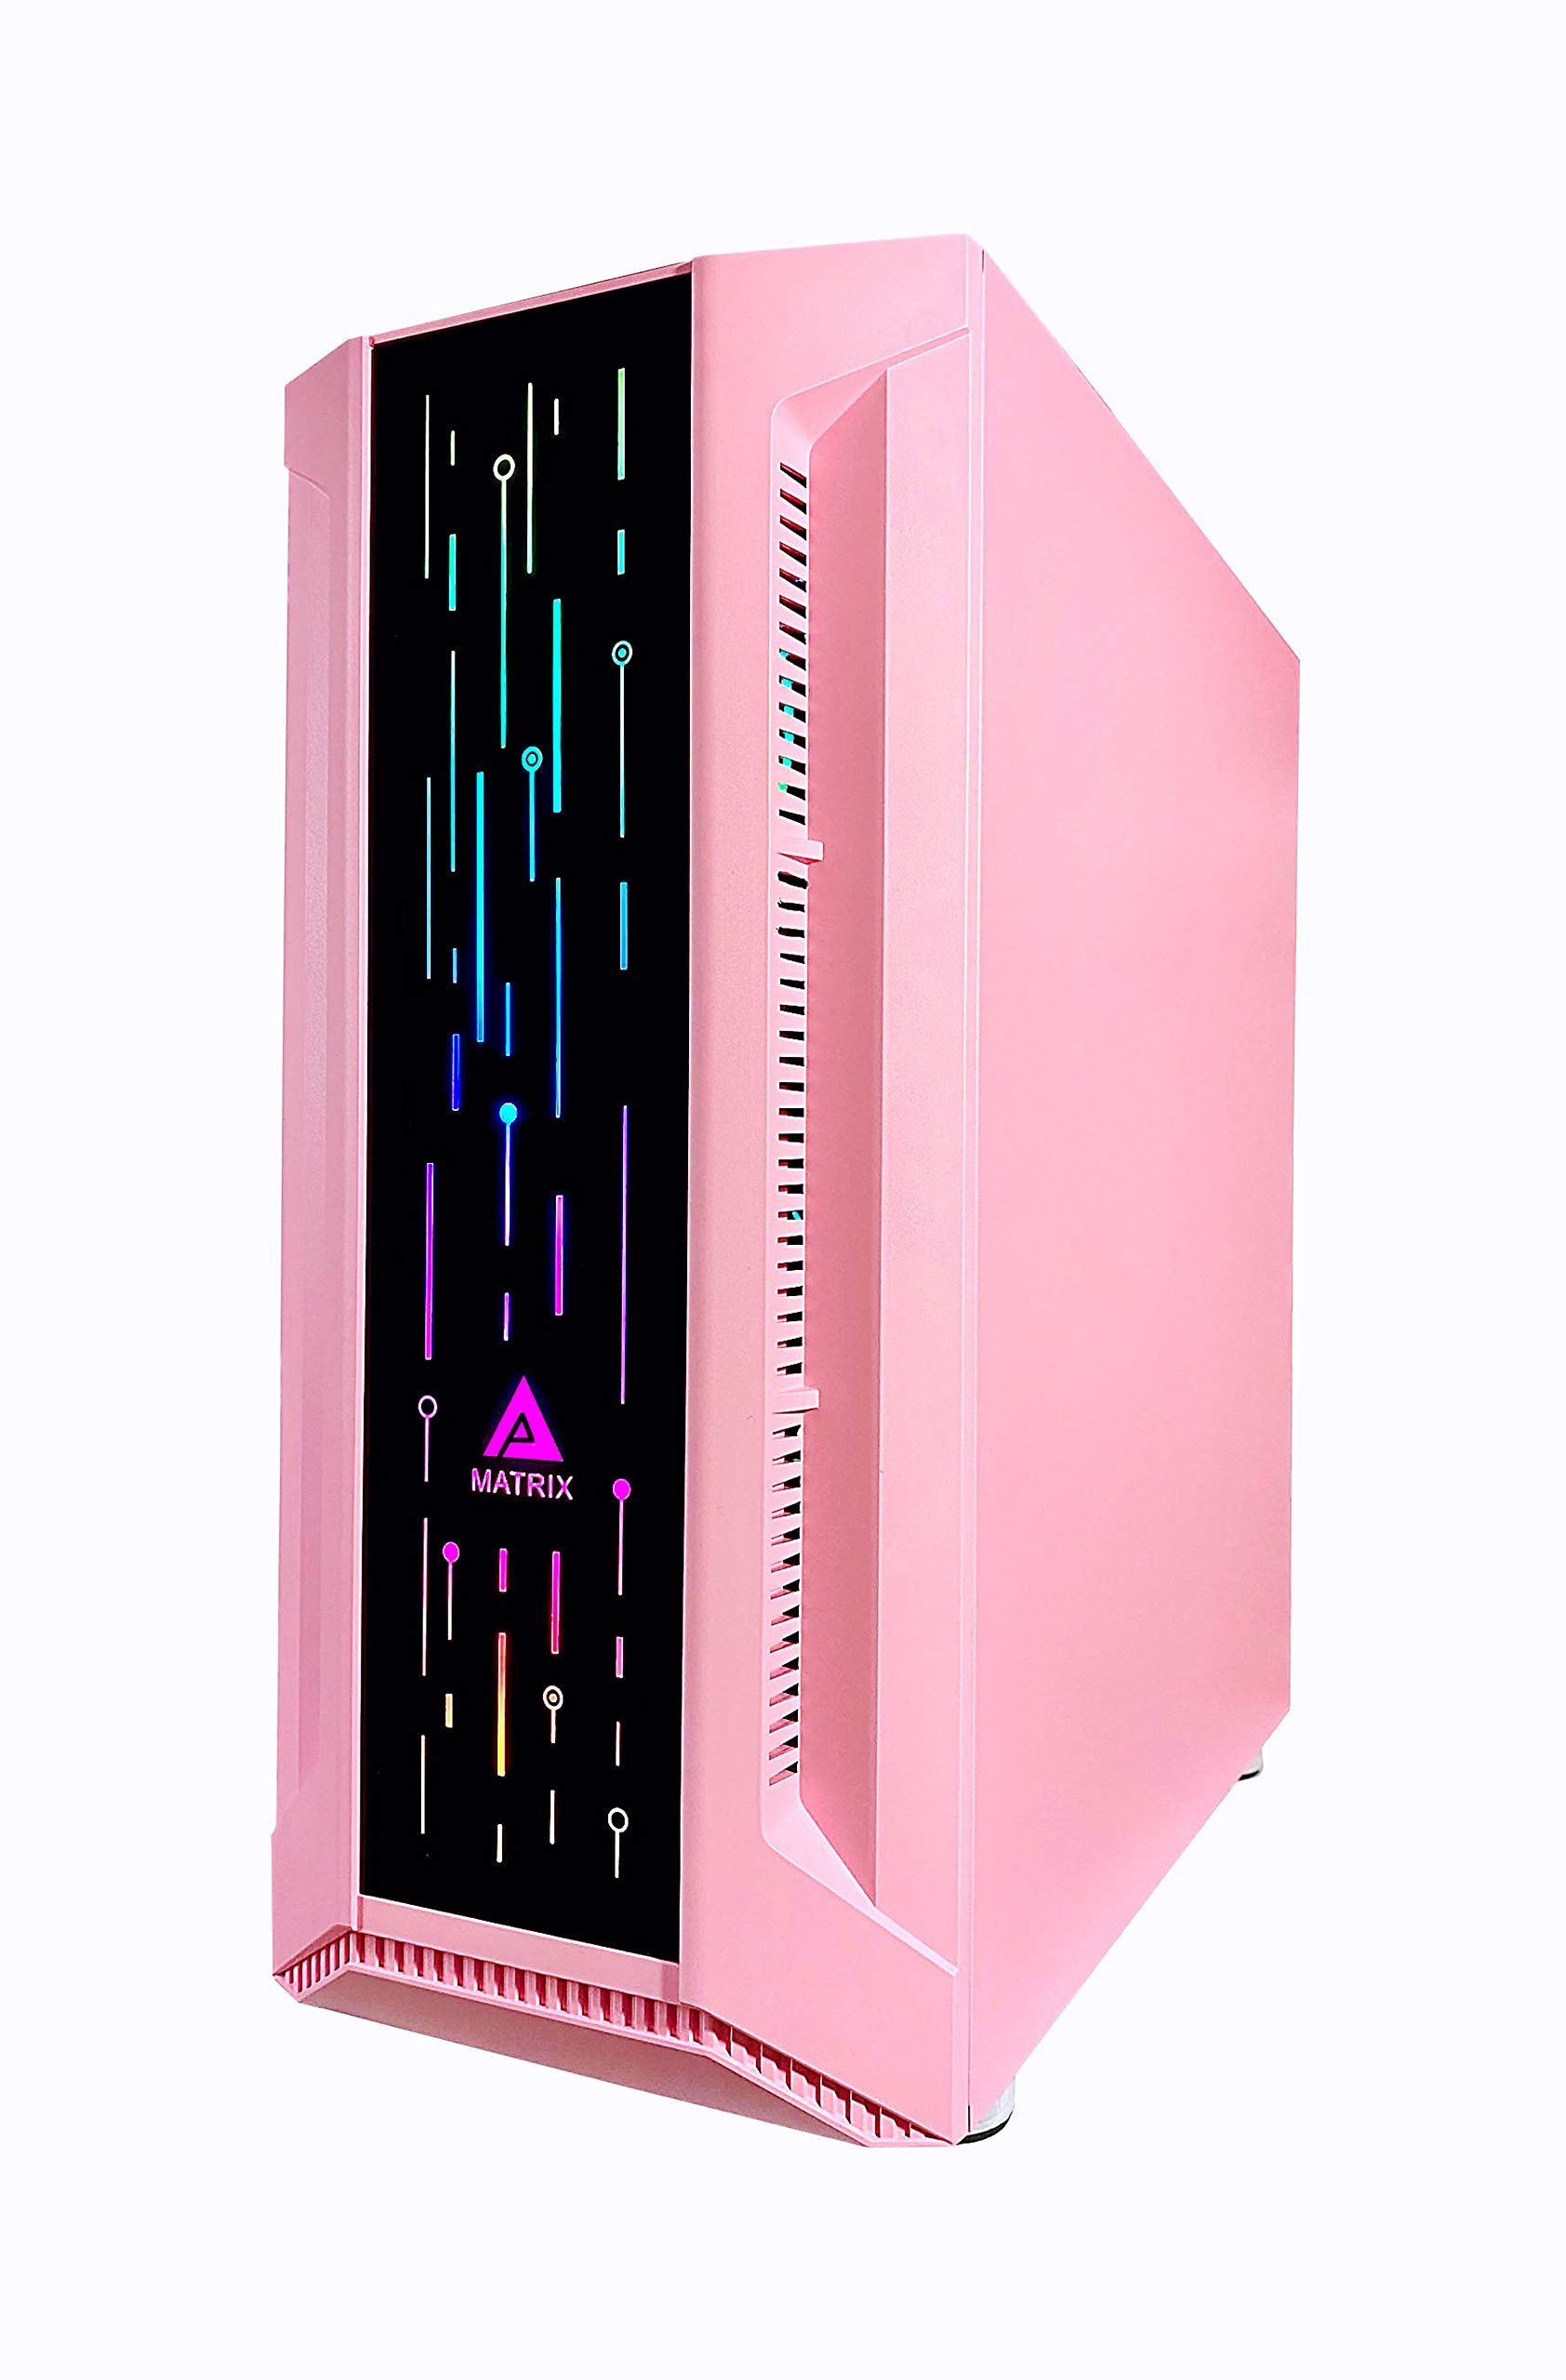 Apevia Matrix-PK Mid Tower Gaming Case with 1 x Tempered Glass Panel, Top USB3.0/USB2.0/Audio Ports, 4 x RGB Fans, Pink Frame